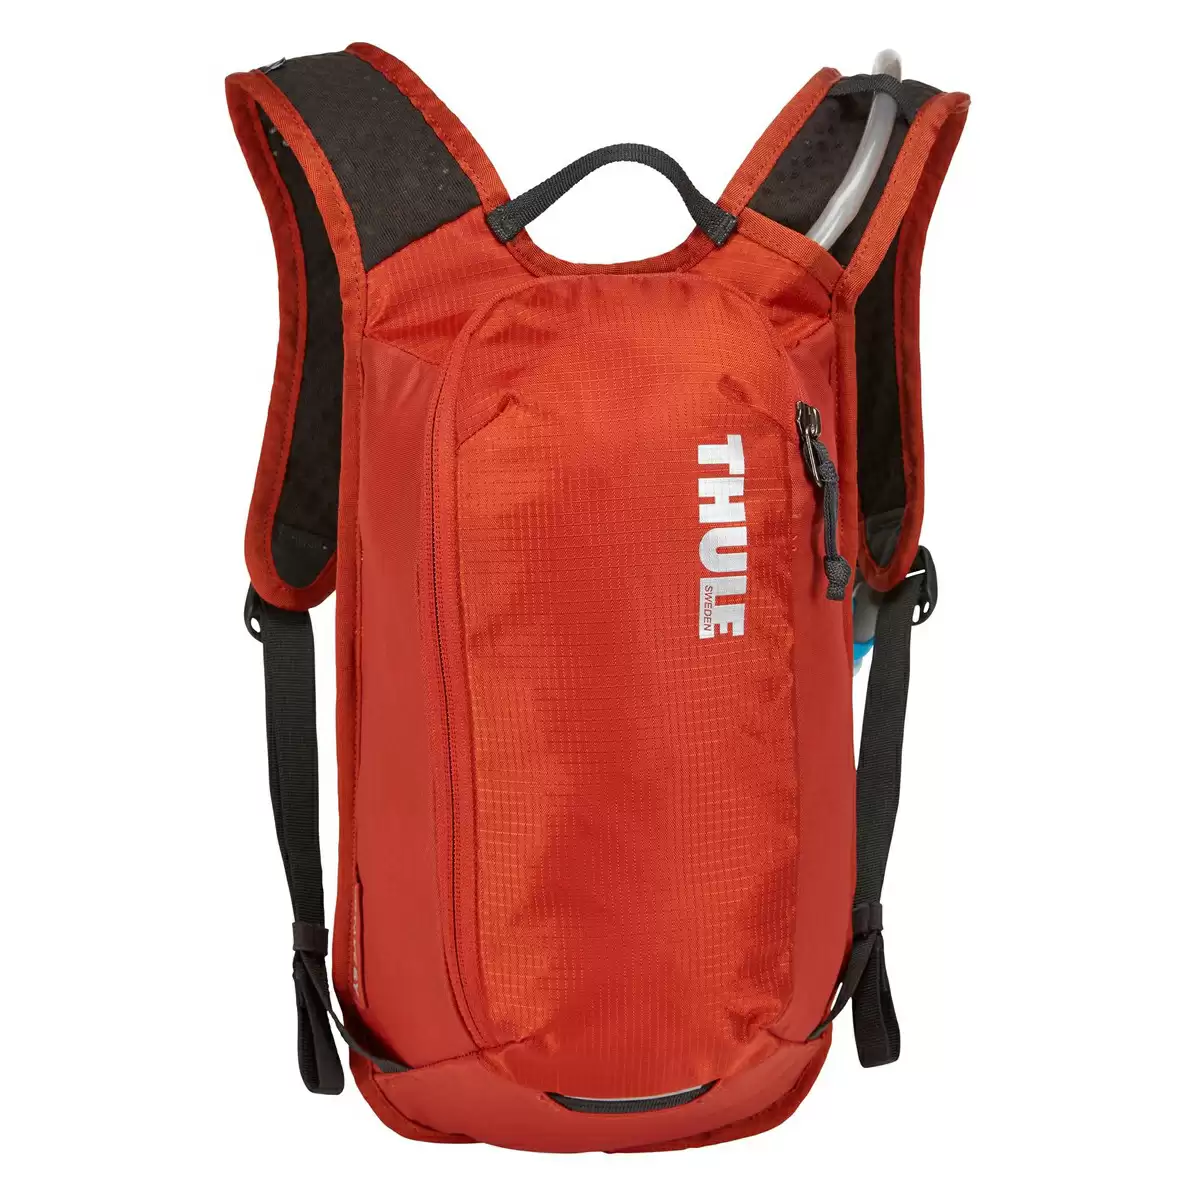 Water backpack uptake youth 6L red #1